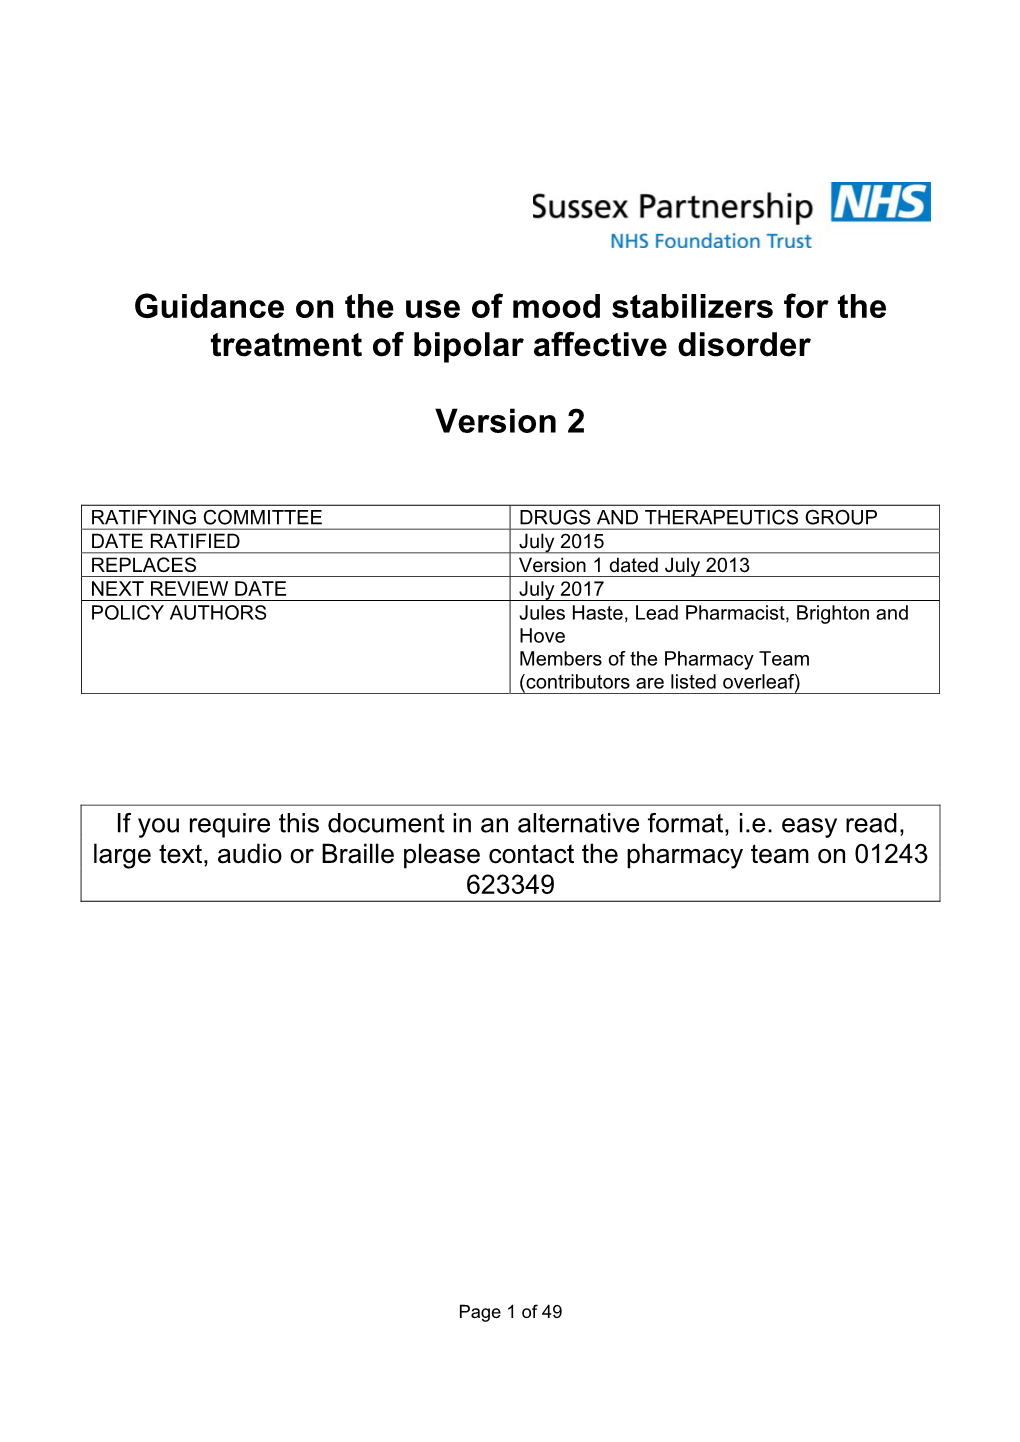 Guidance on the Use of Mood Stabilizers for the Treatment of Bipolar Affective Disorder Version 2